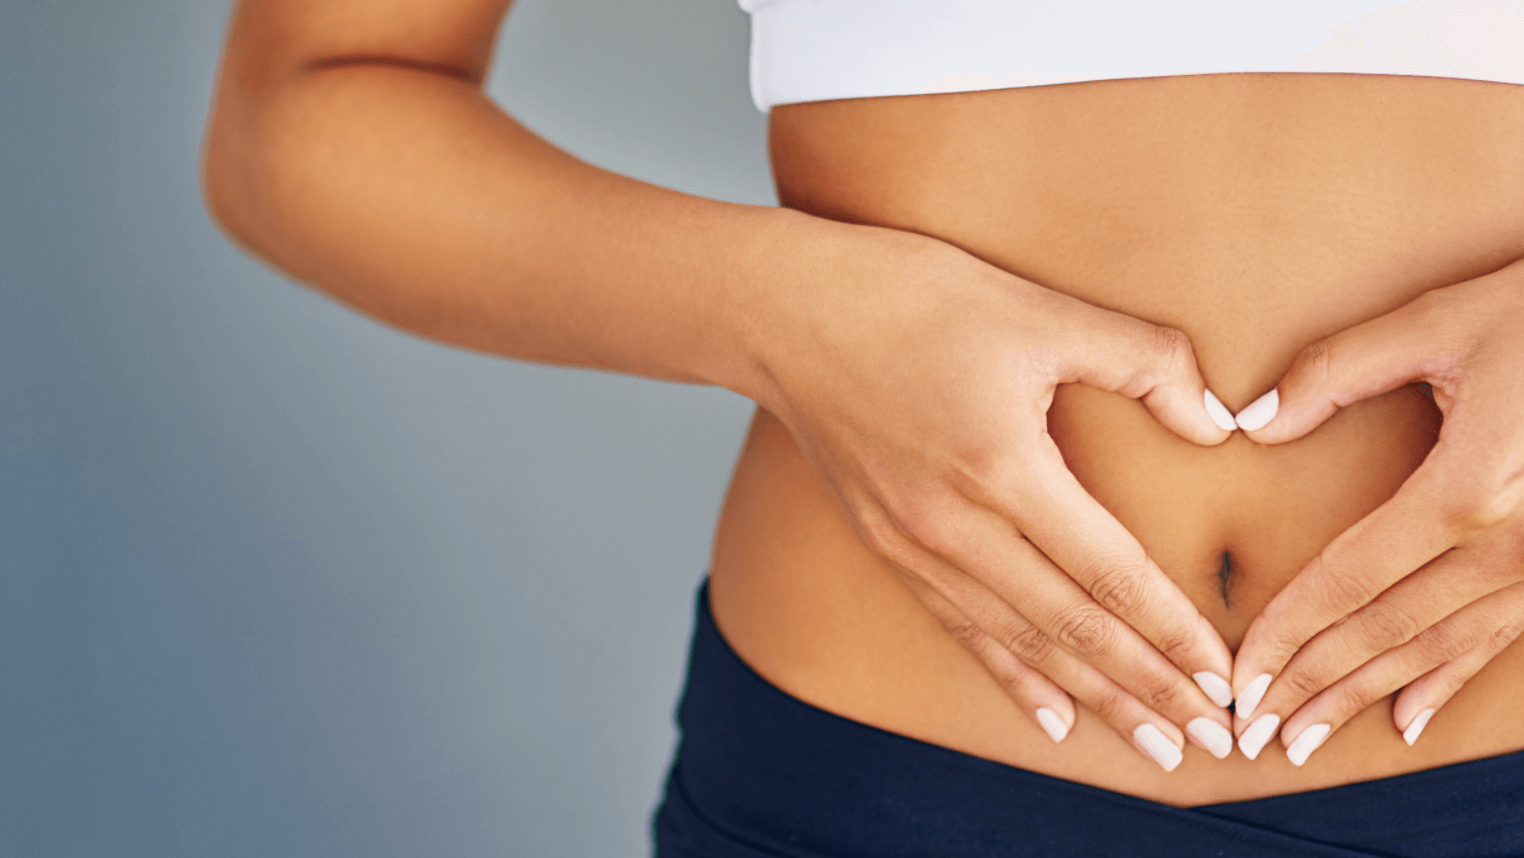 How Long is the Recovery Process After a Tummy Tuck?